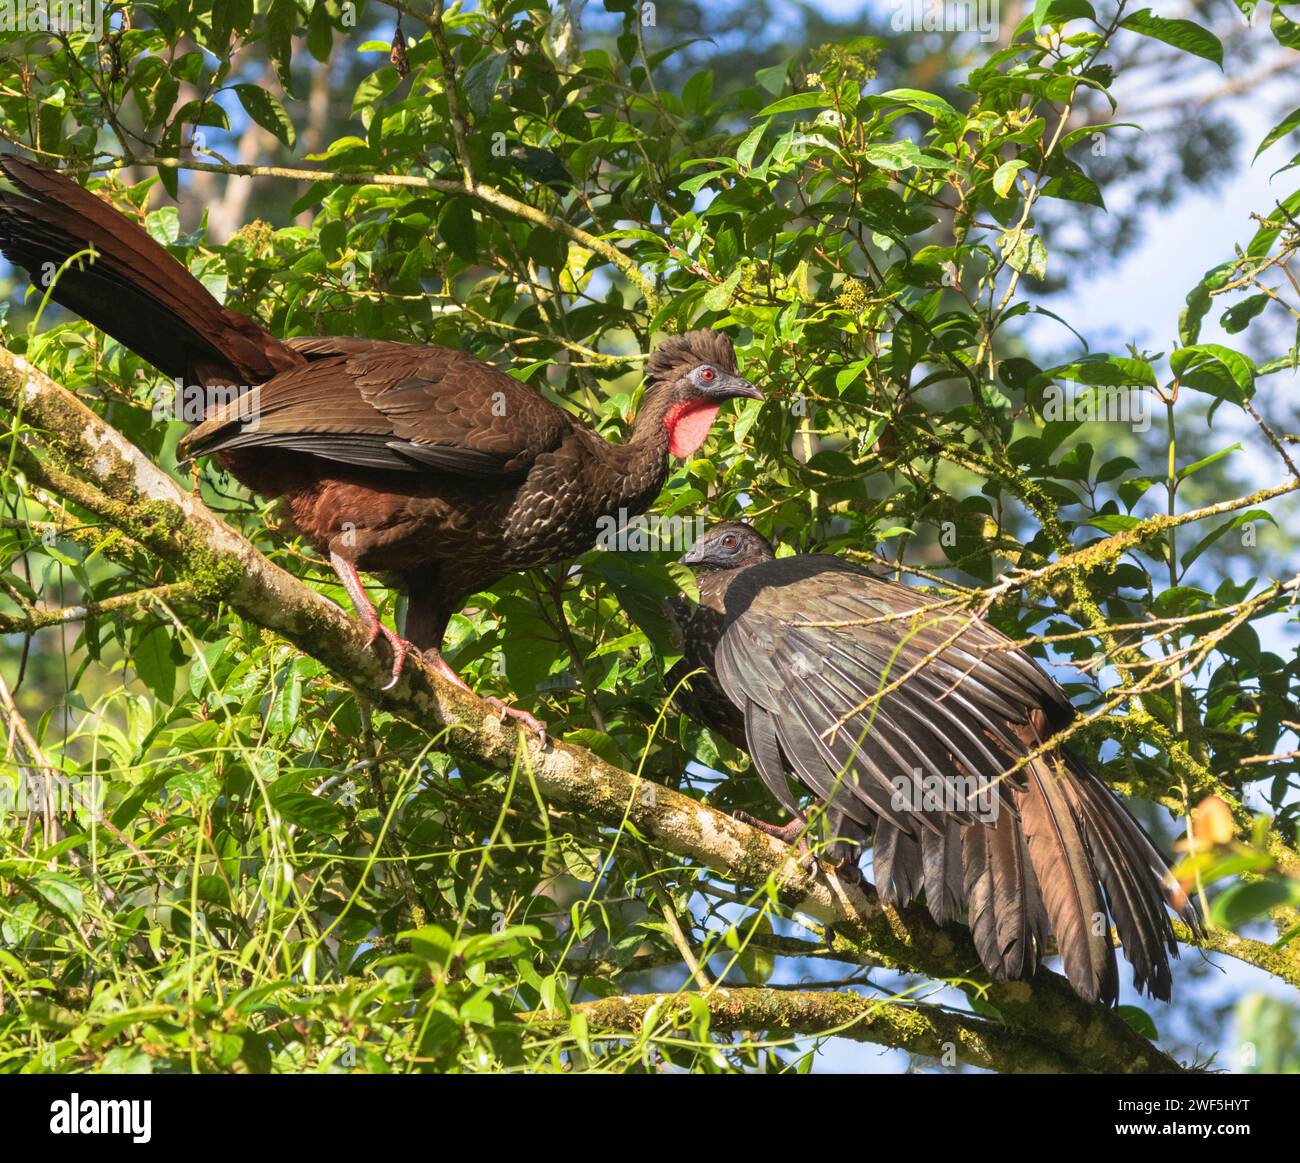 Couple of Crested Guans (Penelope purpurascens) feeding on a tree at La Selva Biological station, Costa Rica Stock Photo